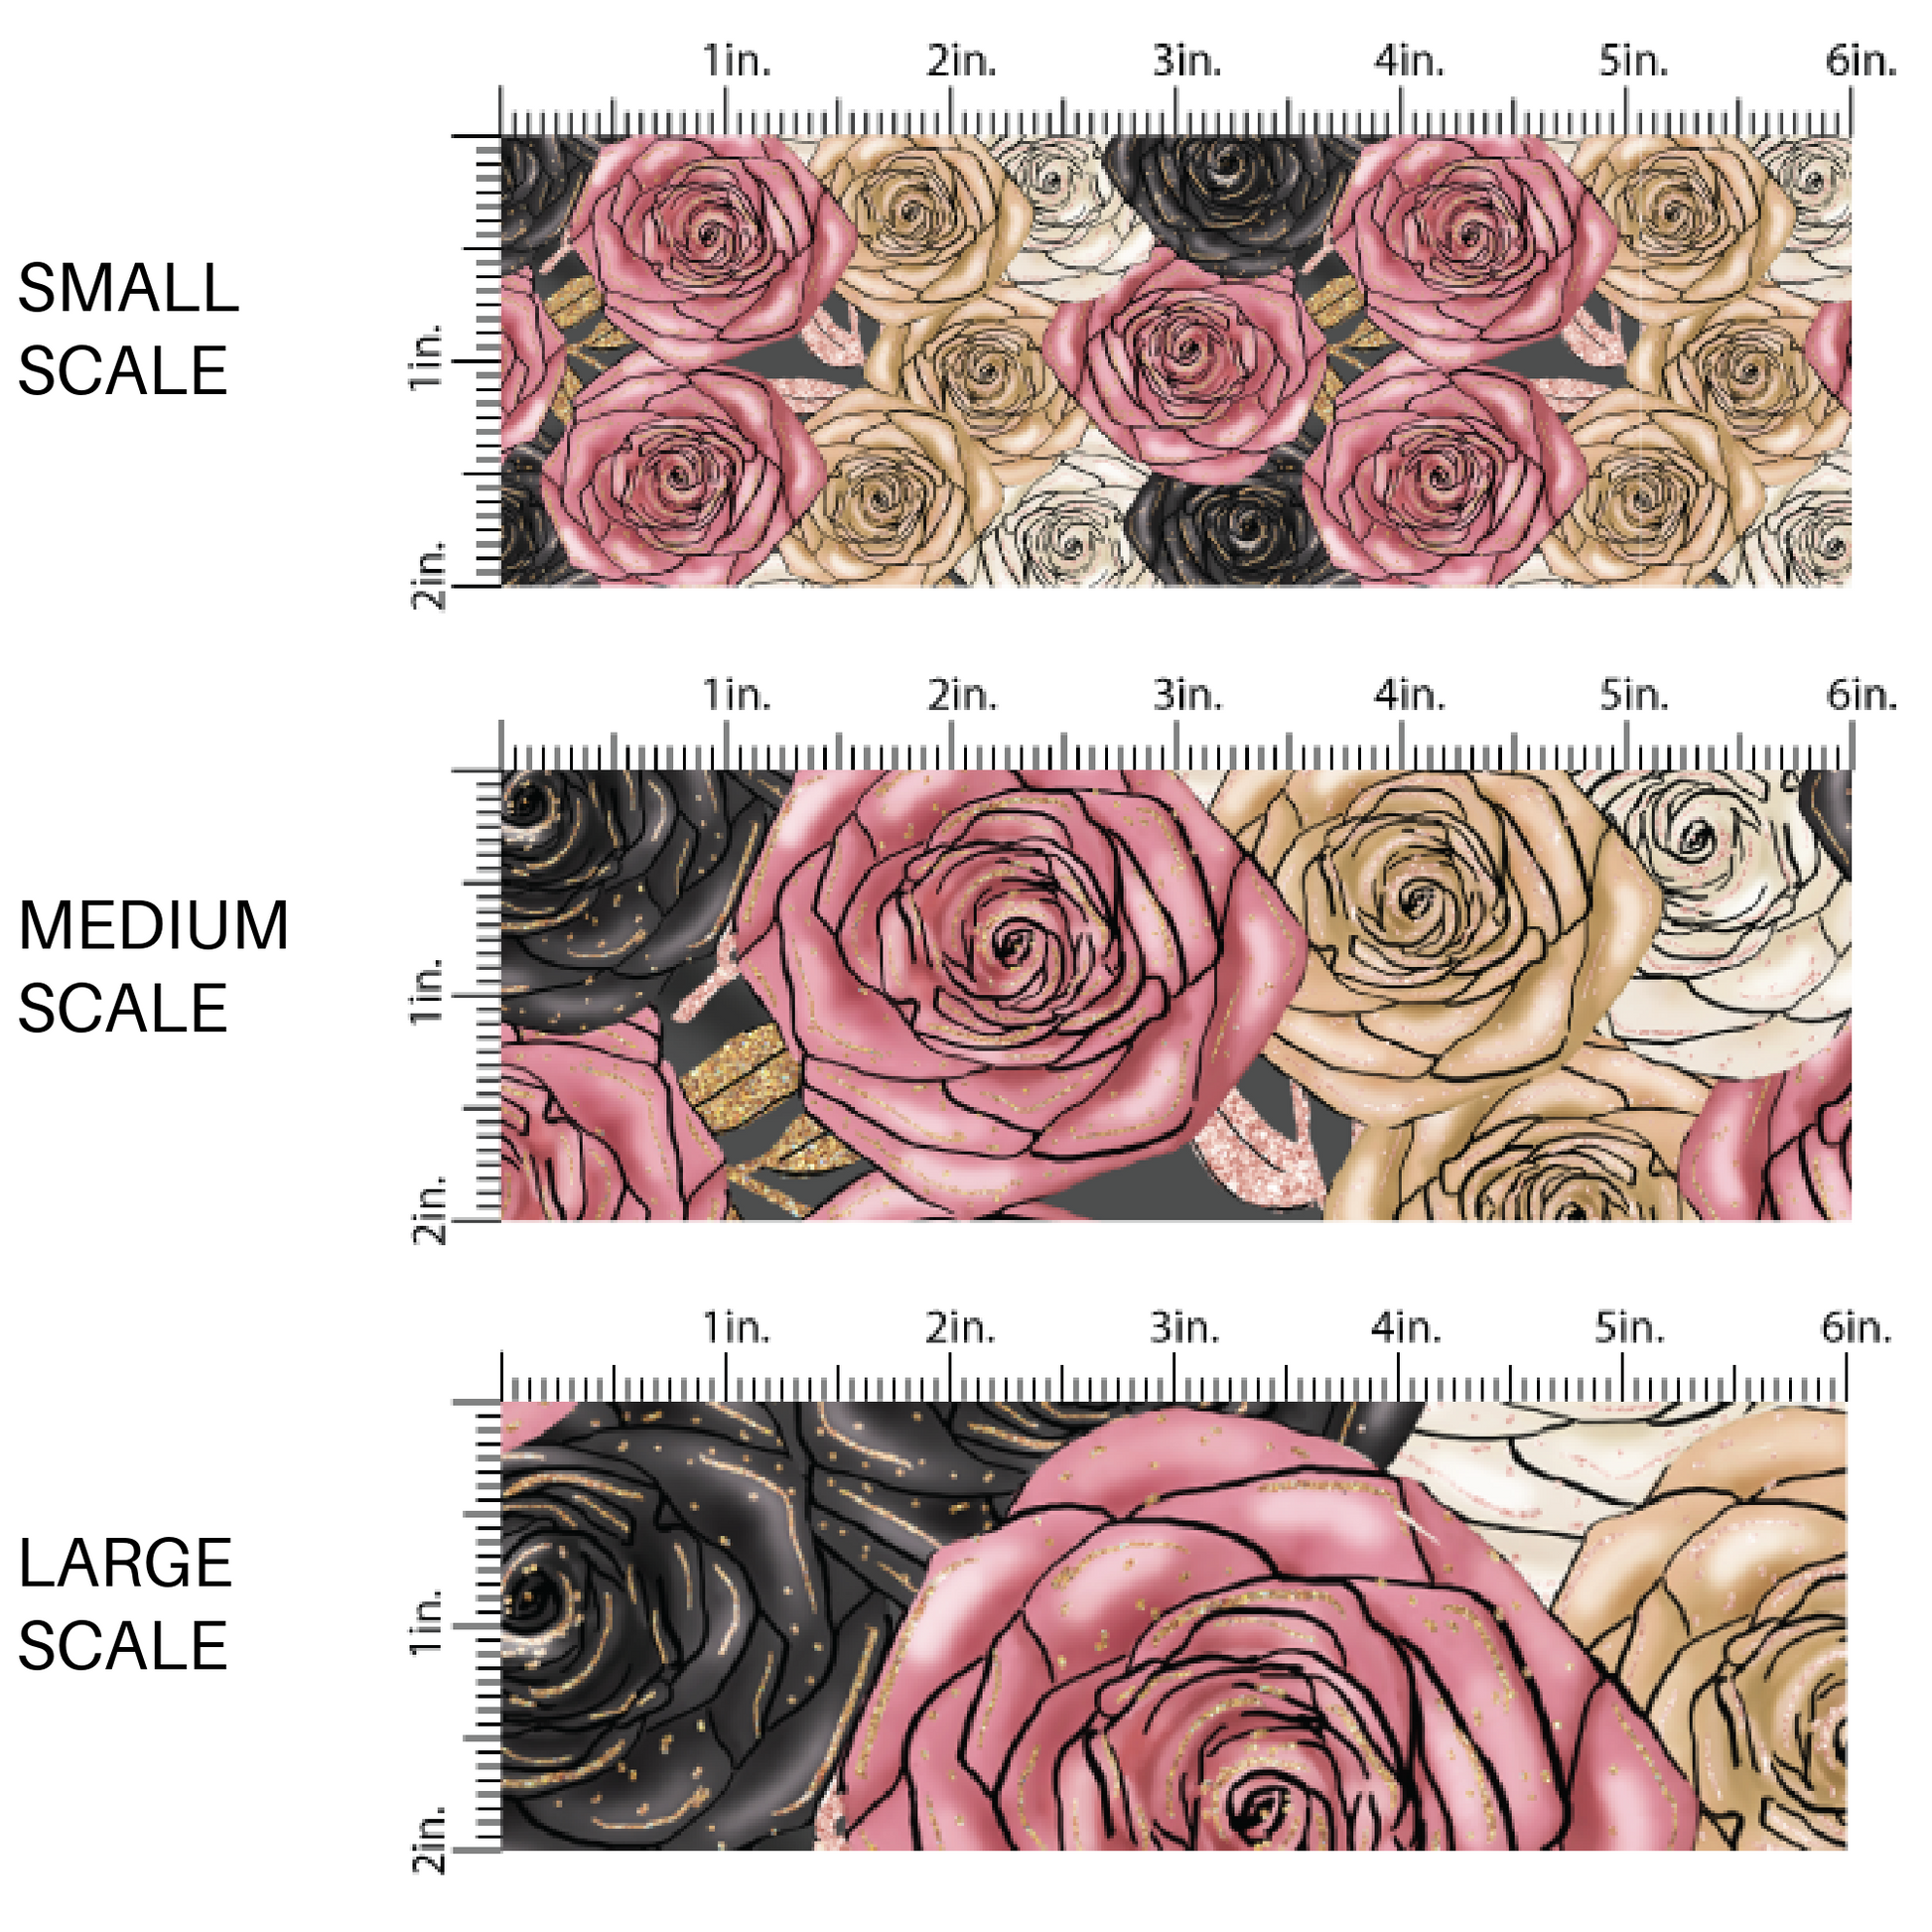 Black, pink, and cream roses multi-colored fabric by the yard scaled image guide.